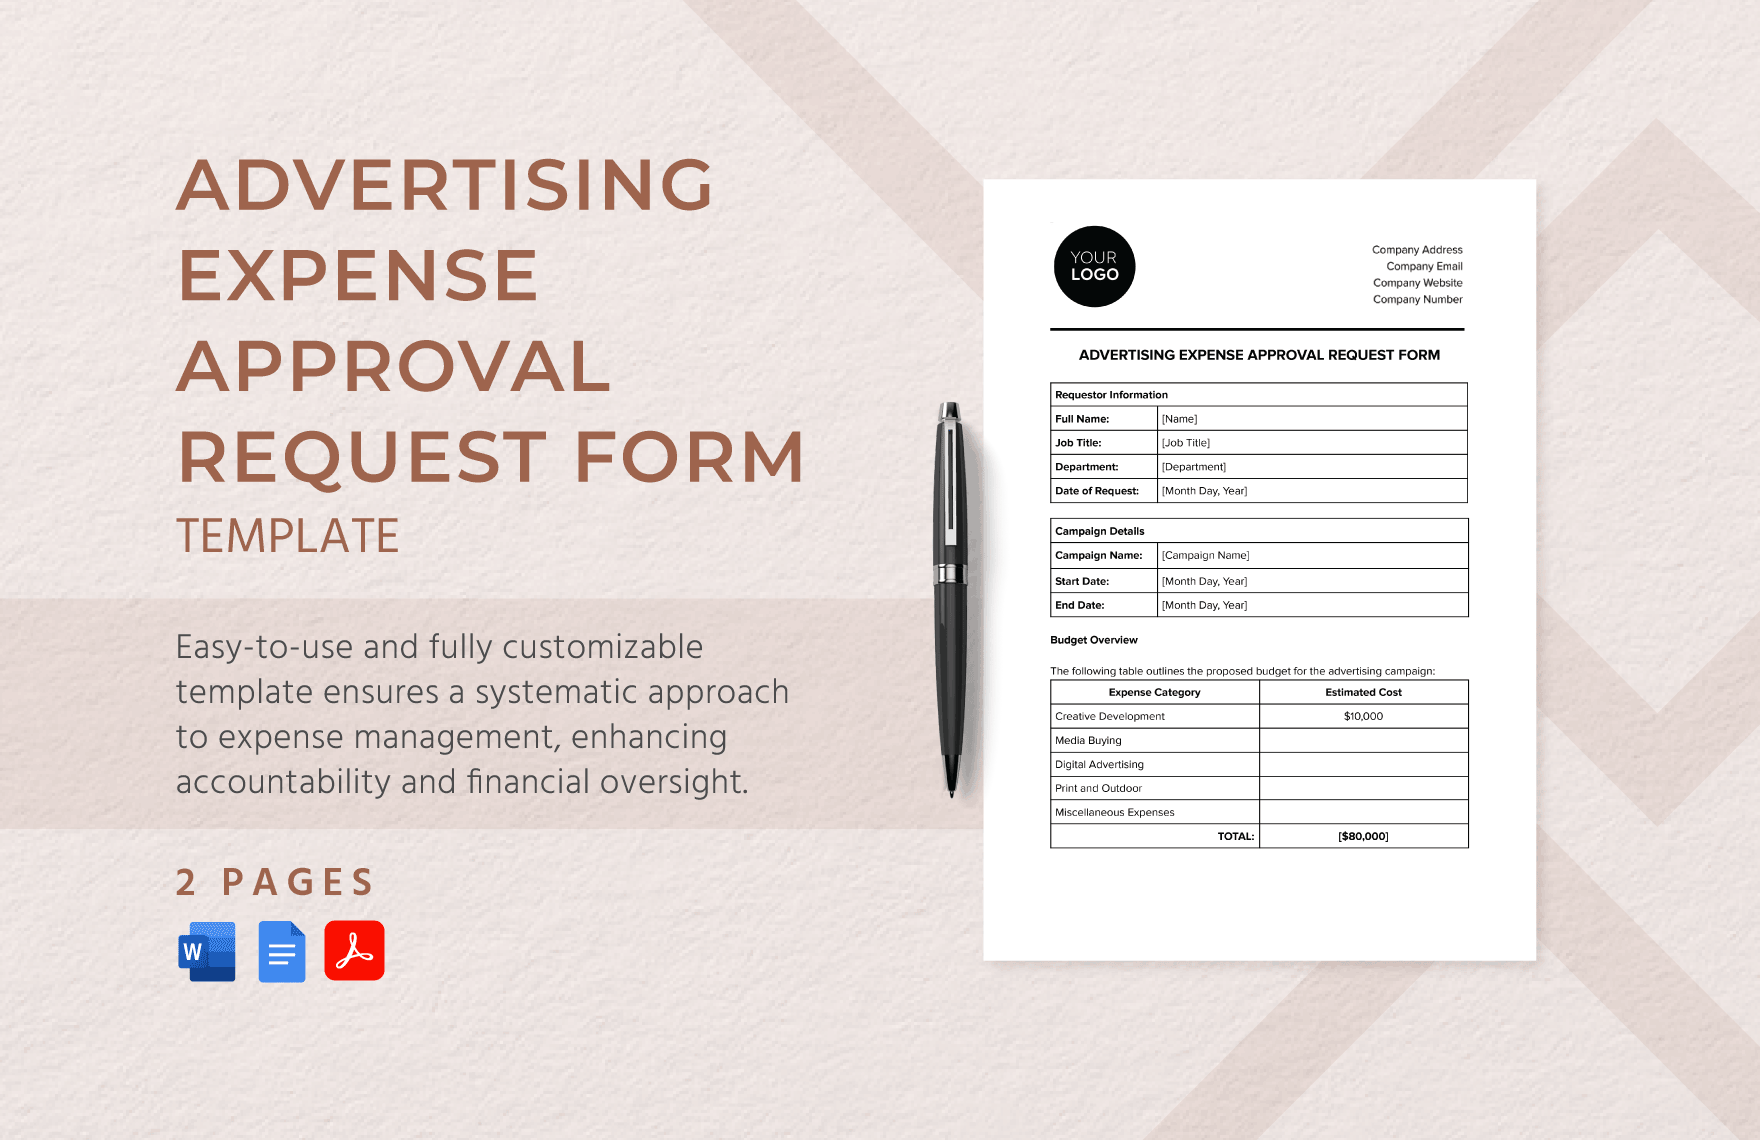 Advertising Expense Approval Request Form Template in Word, Google Docs, PDF